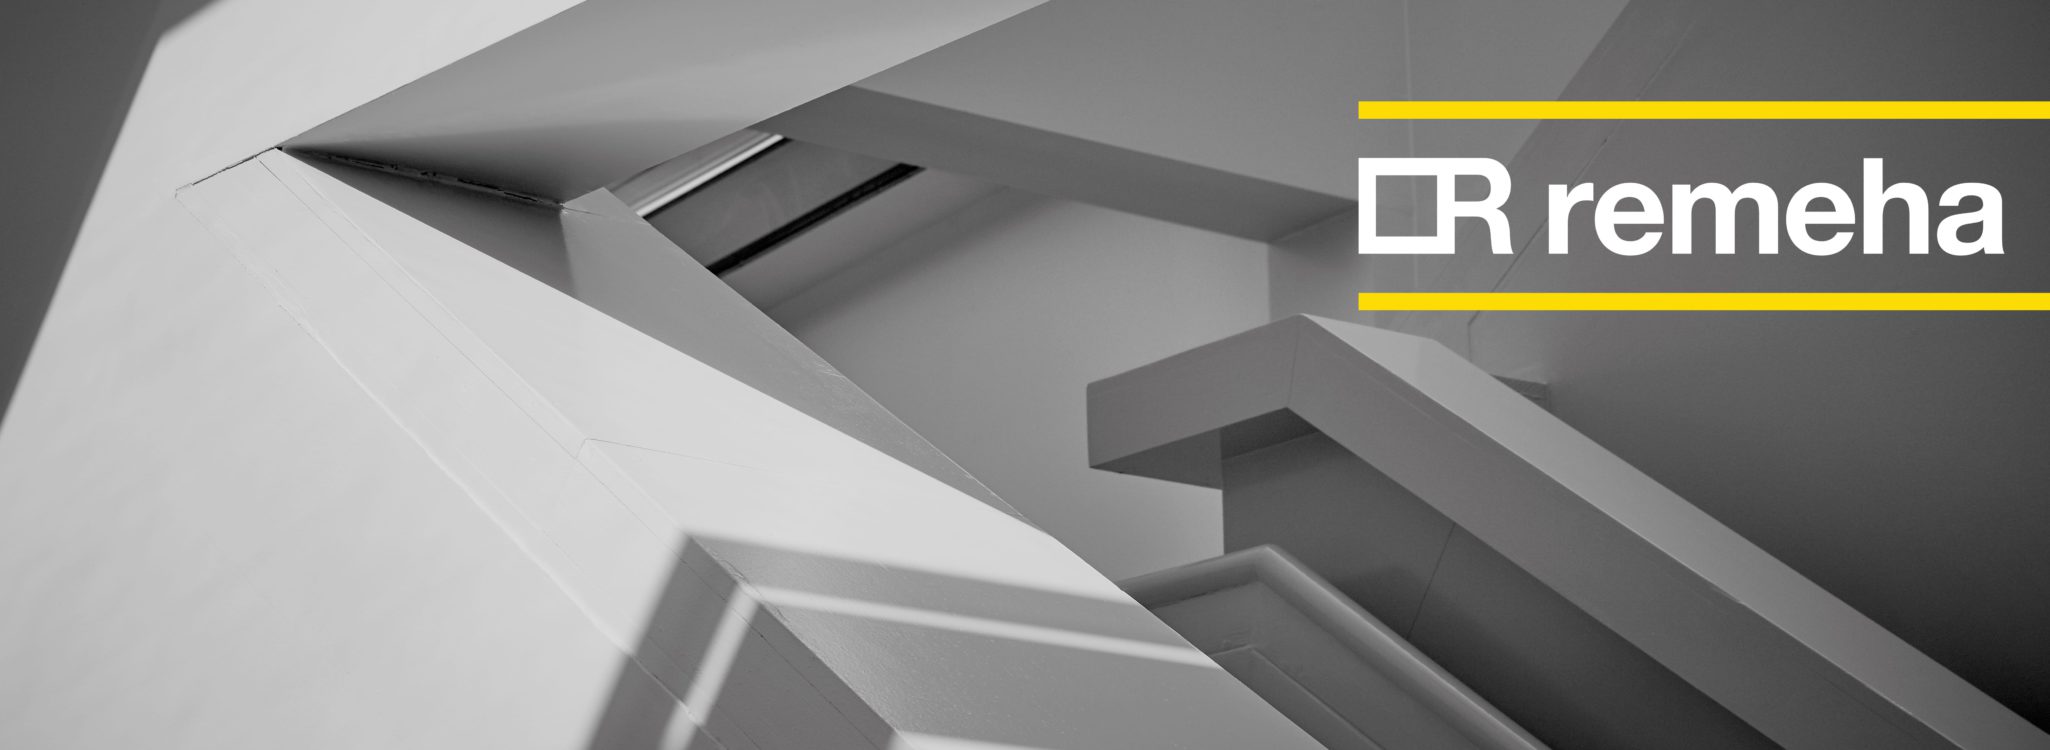 Remeha rebrand case study hero image. Abstract, greyscale architectural shot with new, yellow and white logo overlaid